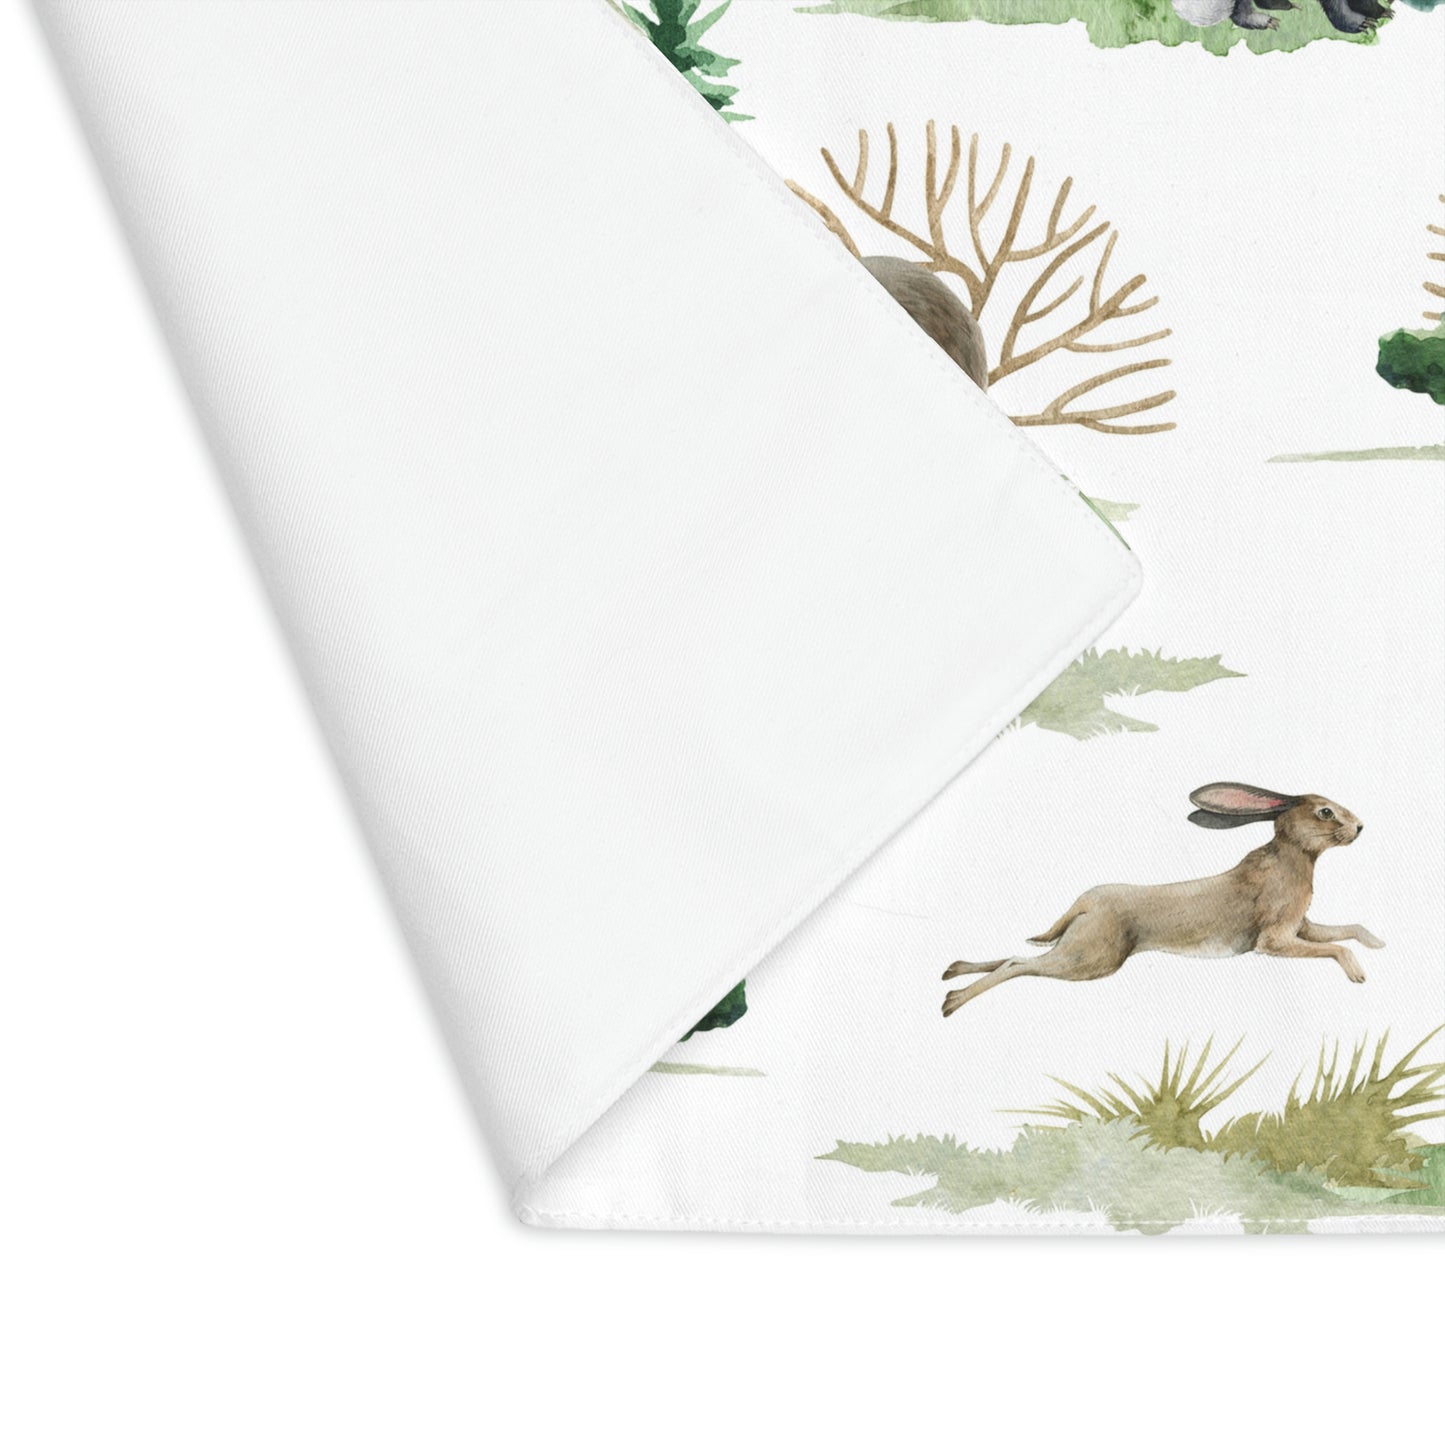 Wild Forest Animals Placemat, 1pc